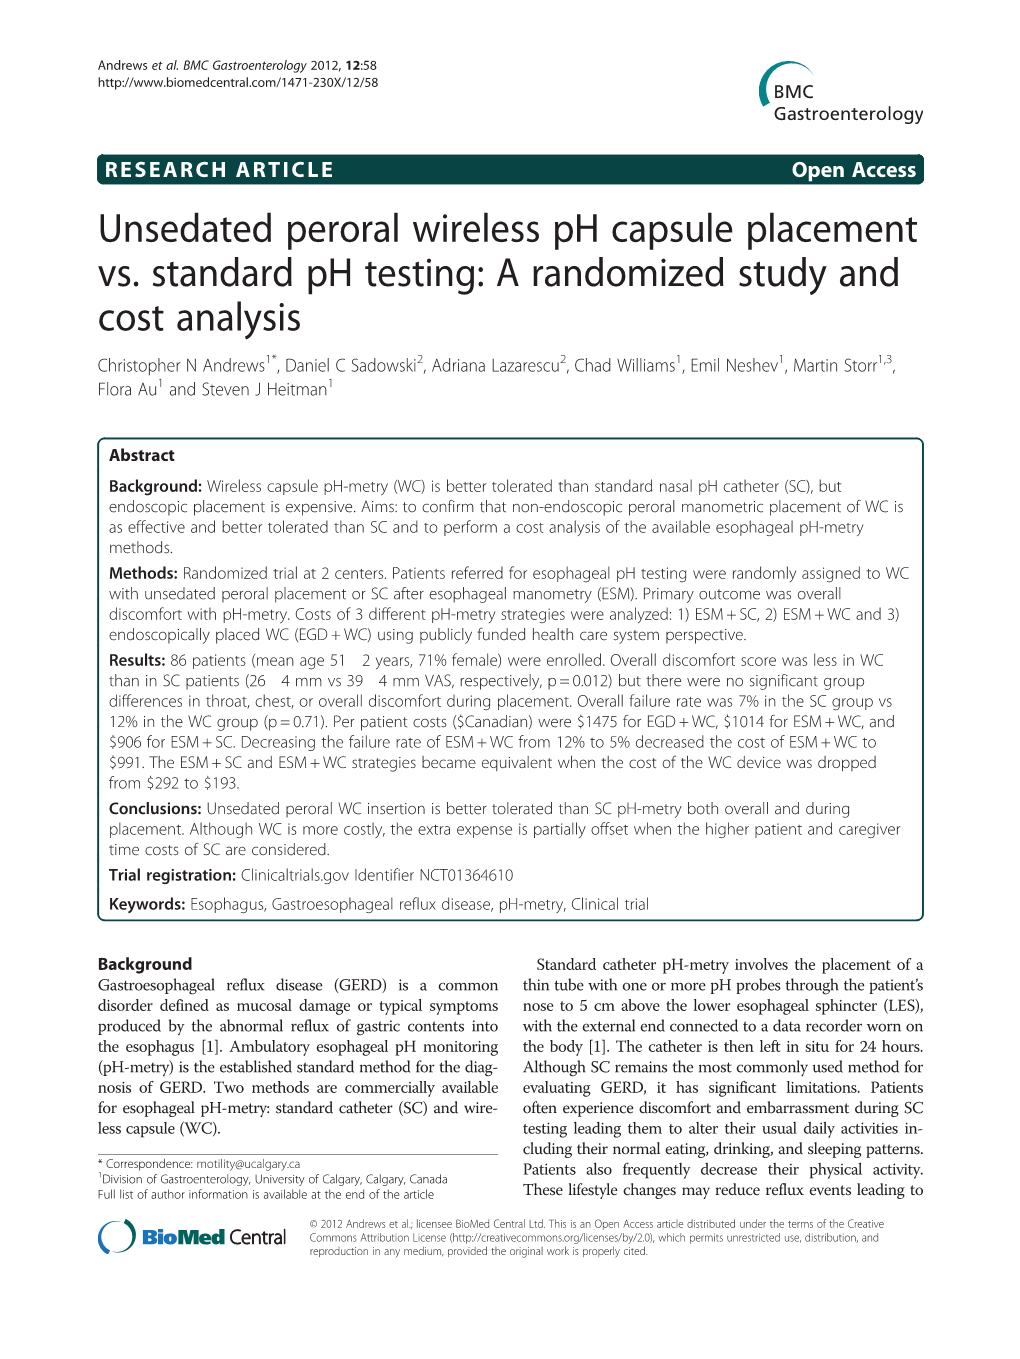 Unsedated Peroral Wireless Ph Capsule Placement Vs